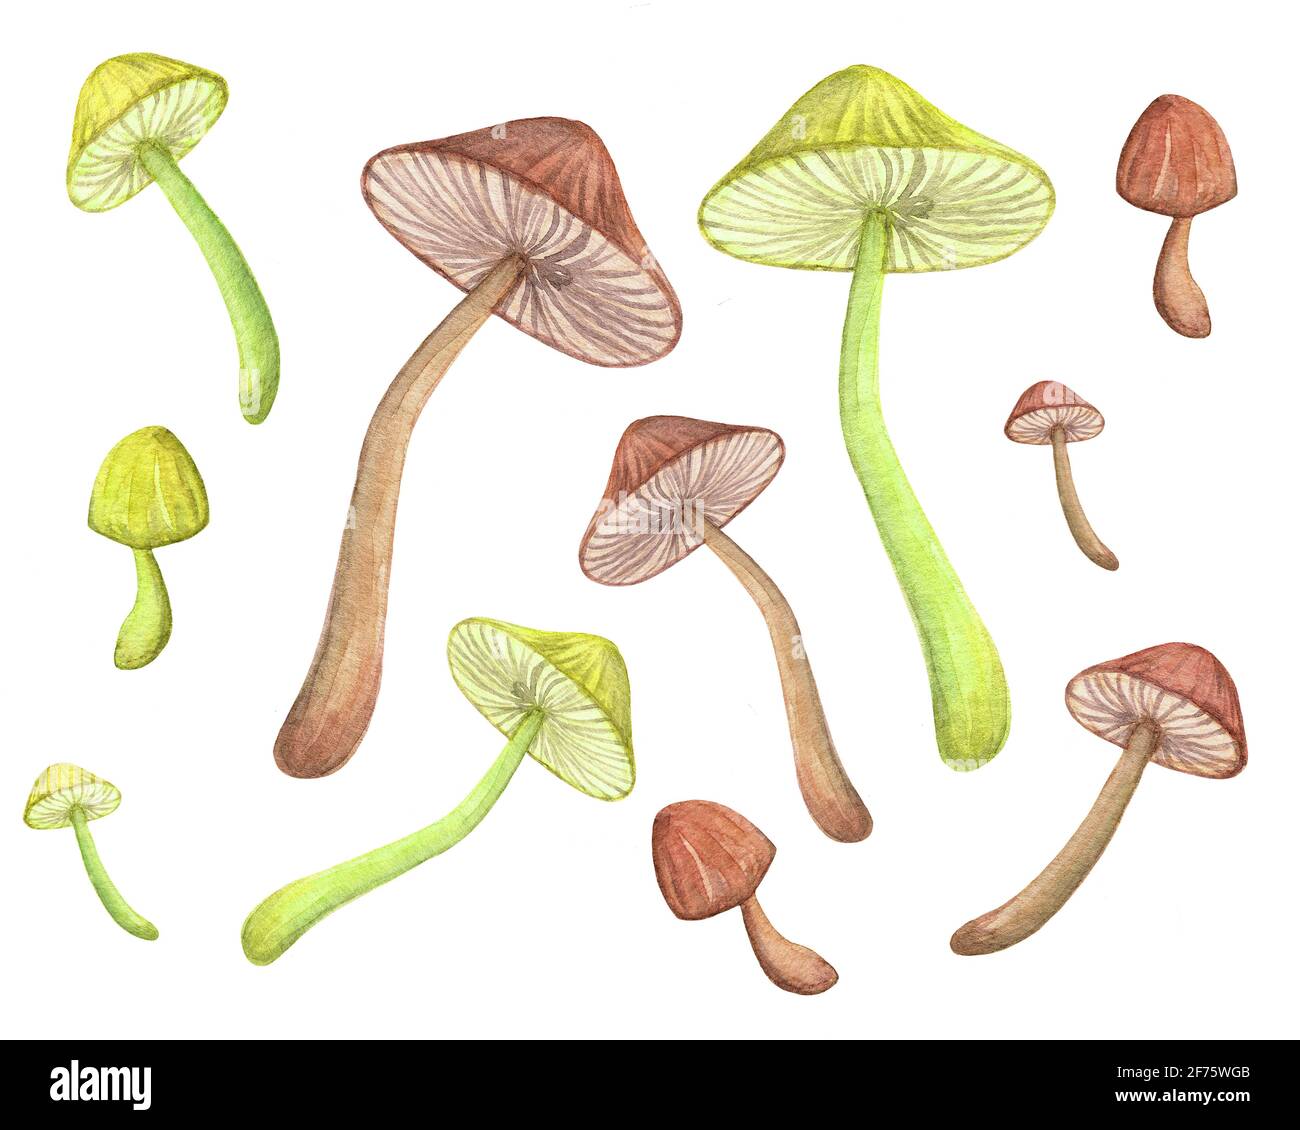 Toadstool watercolor set. Green and brown mushrooms rustic collection Stock Photo